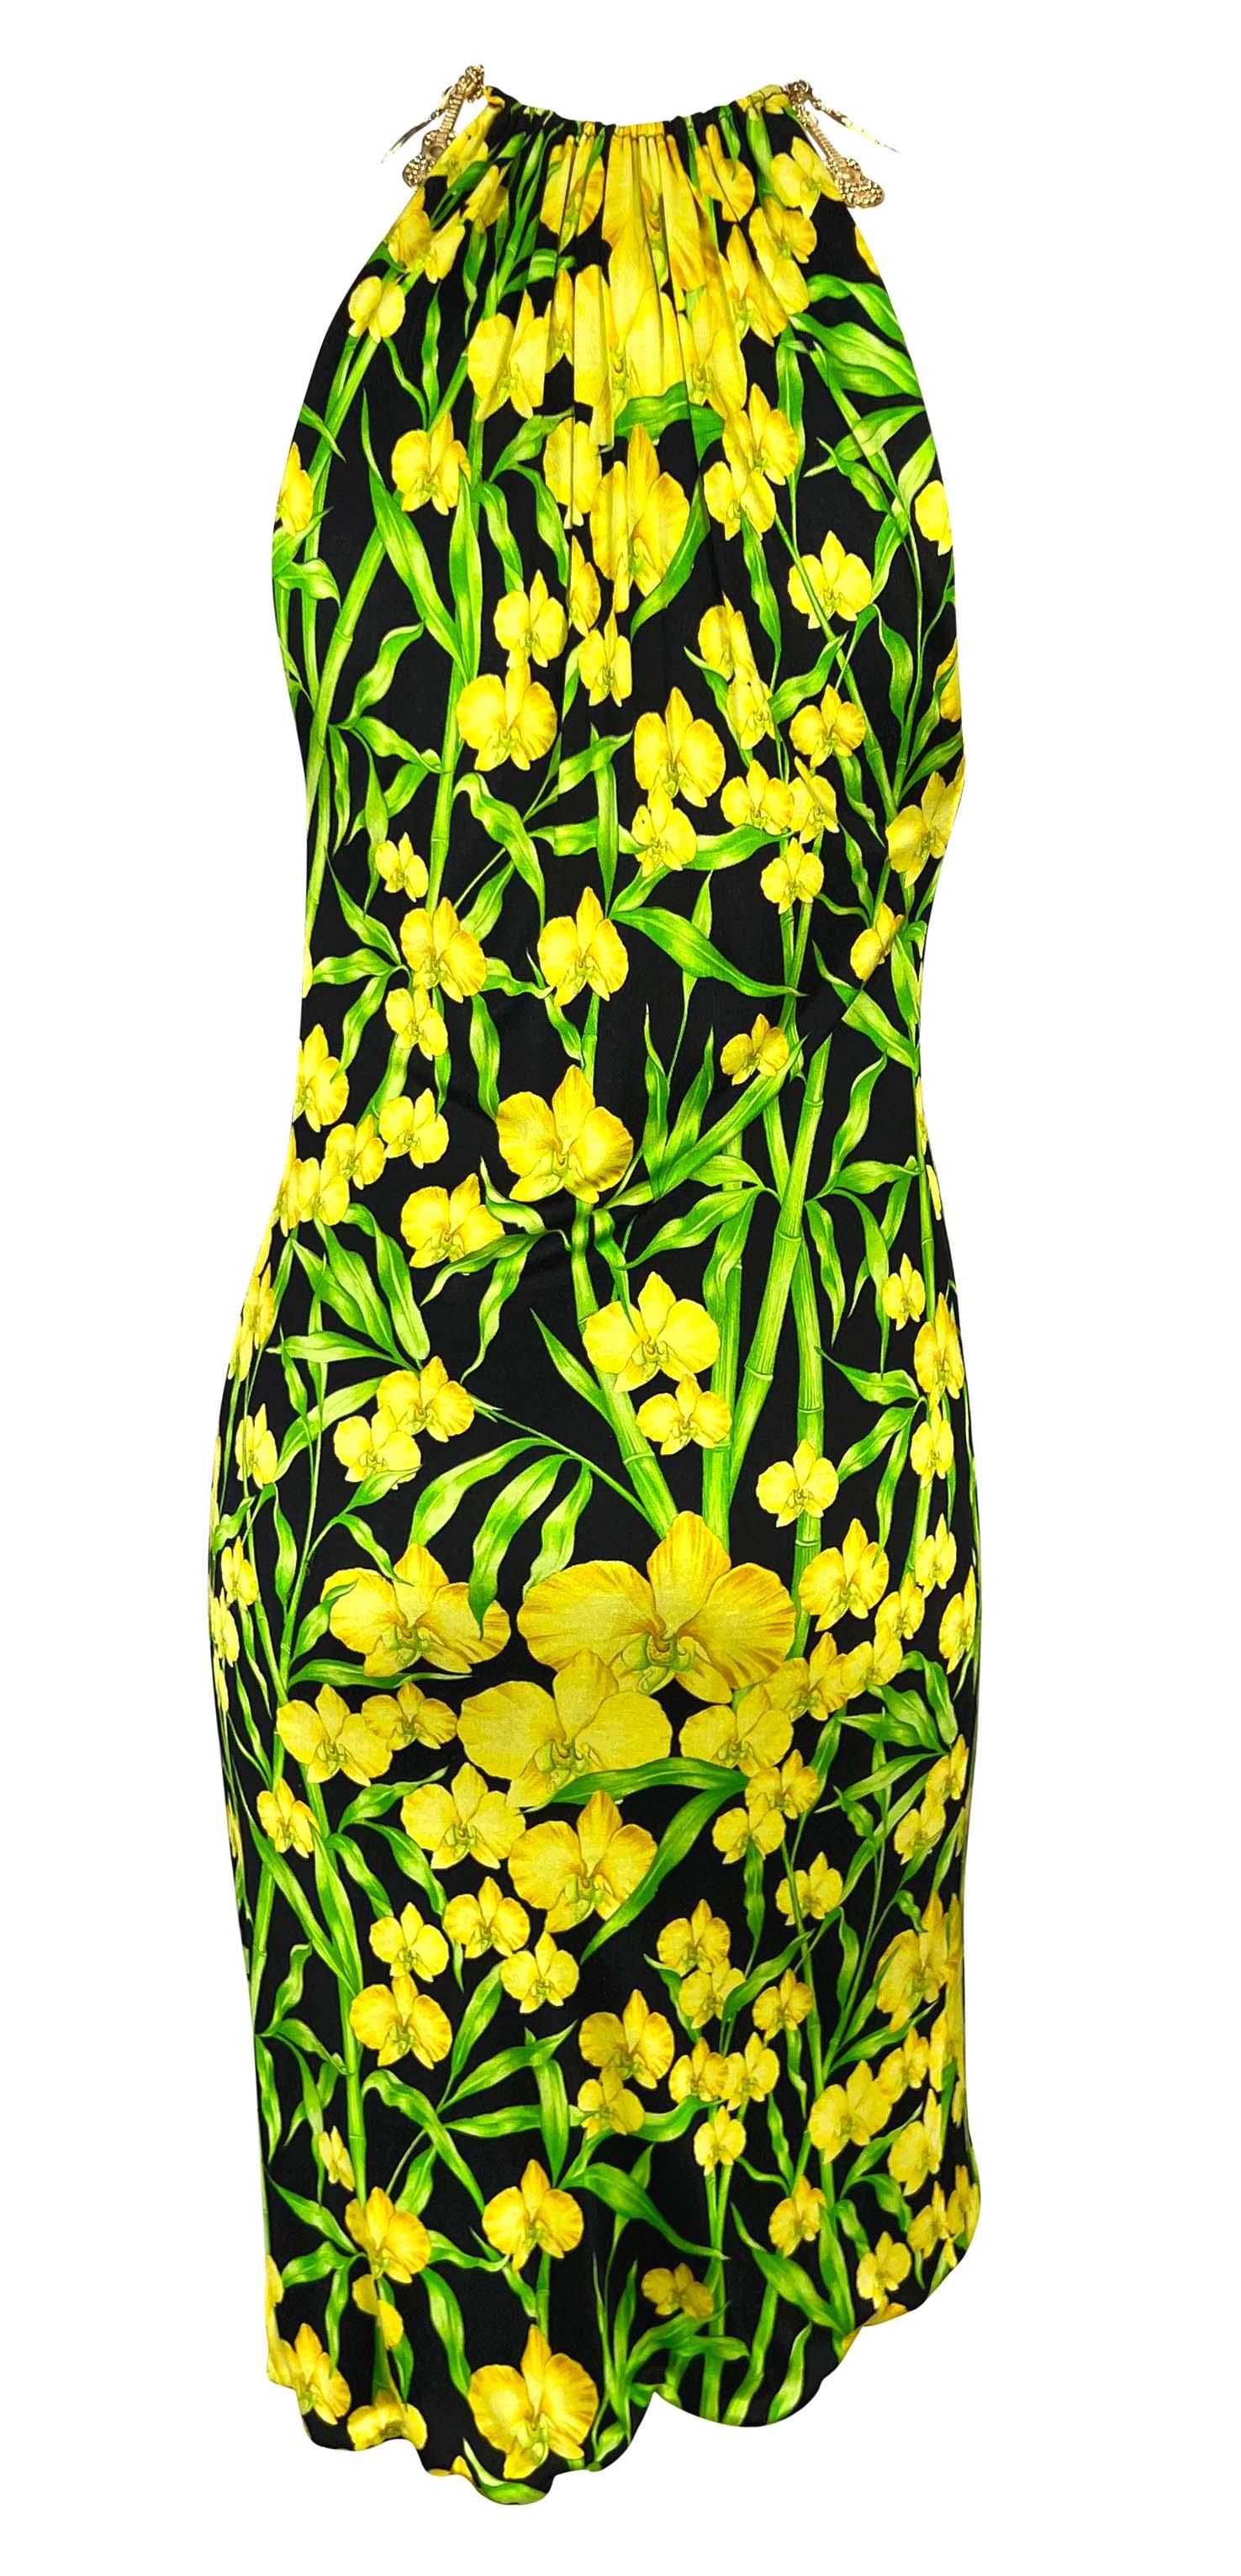 Green S/S 2000 Gianni Versace by Donatella Jungle Yellow Orchid Stretch Charm Dress For Sale